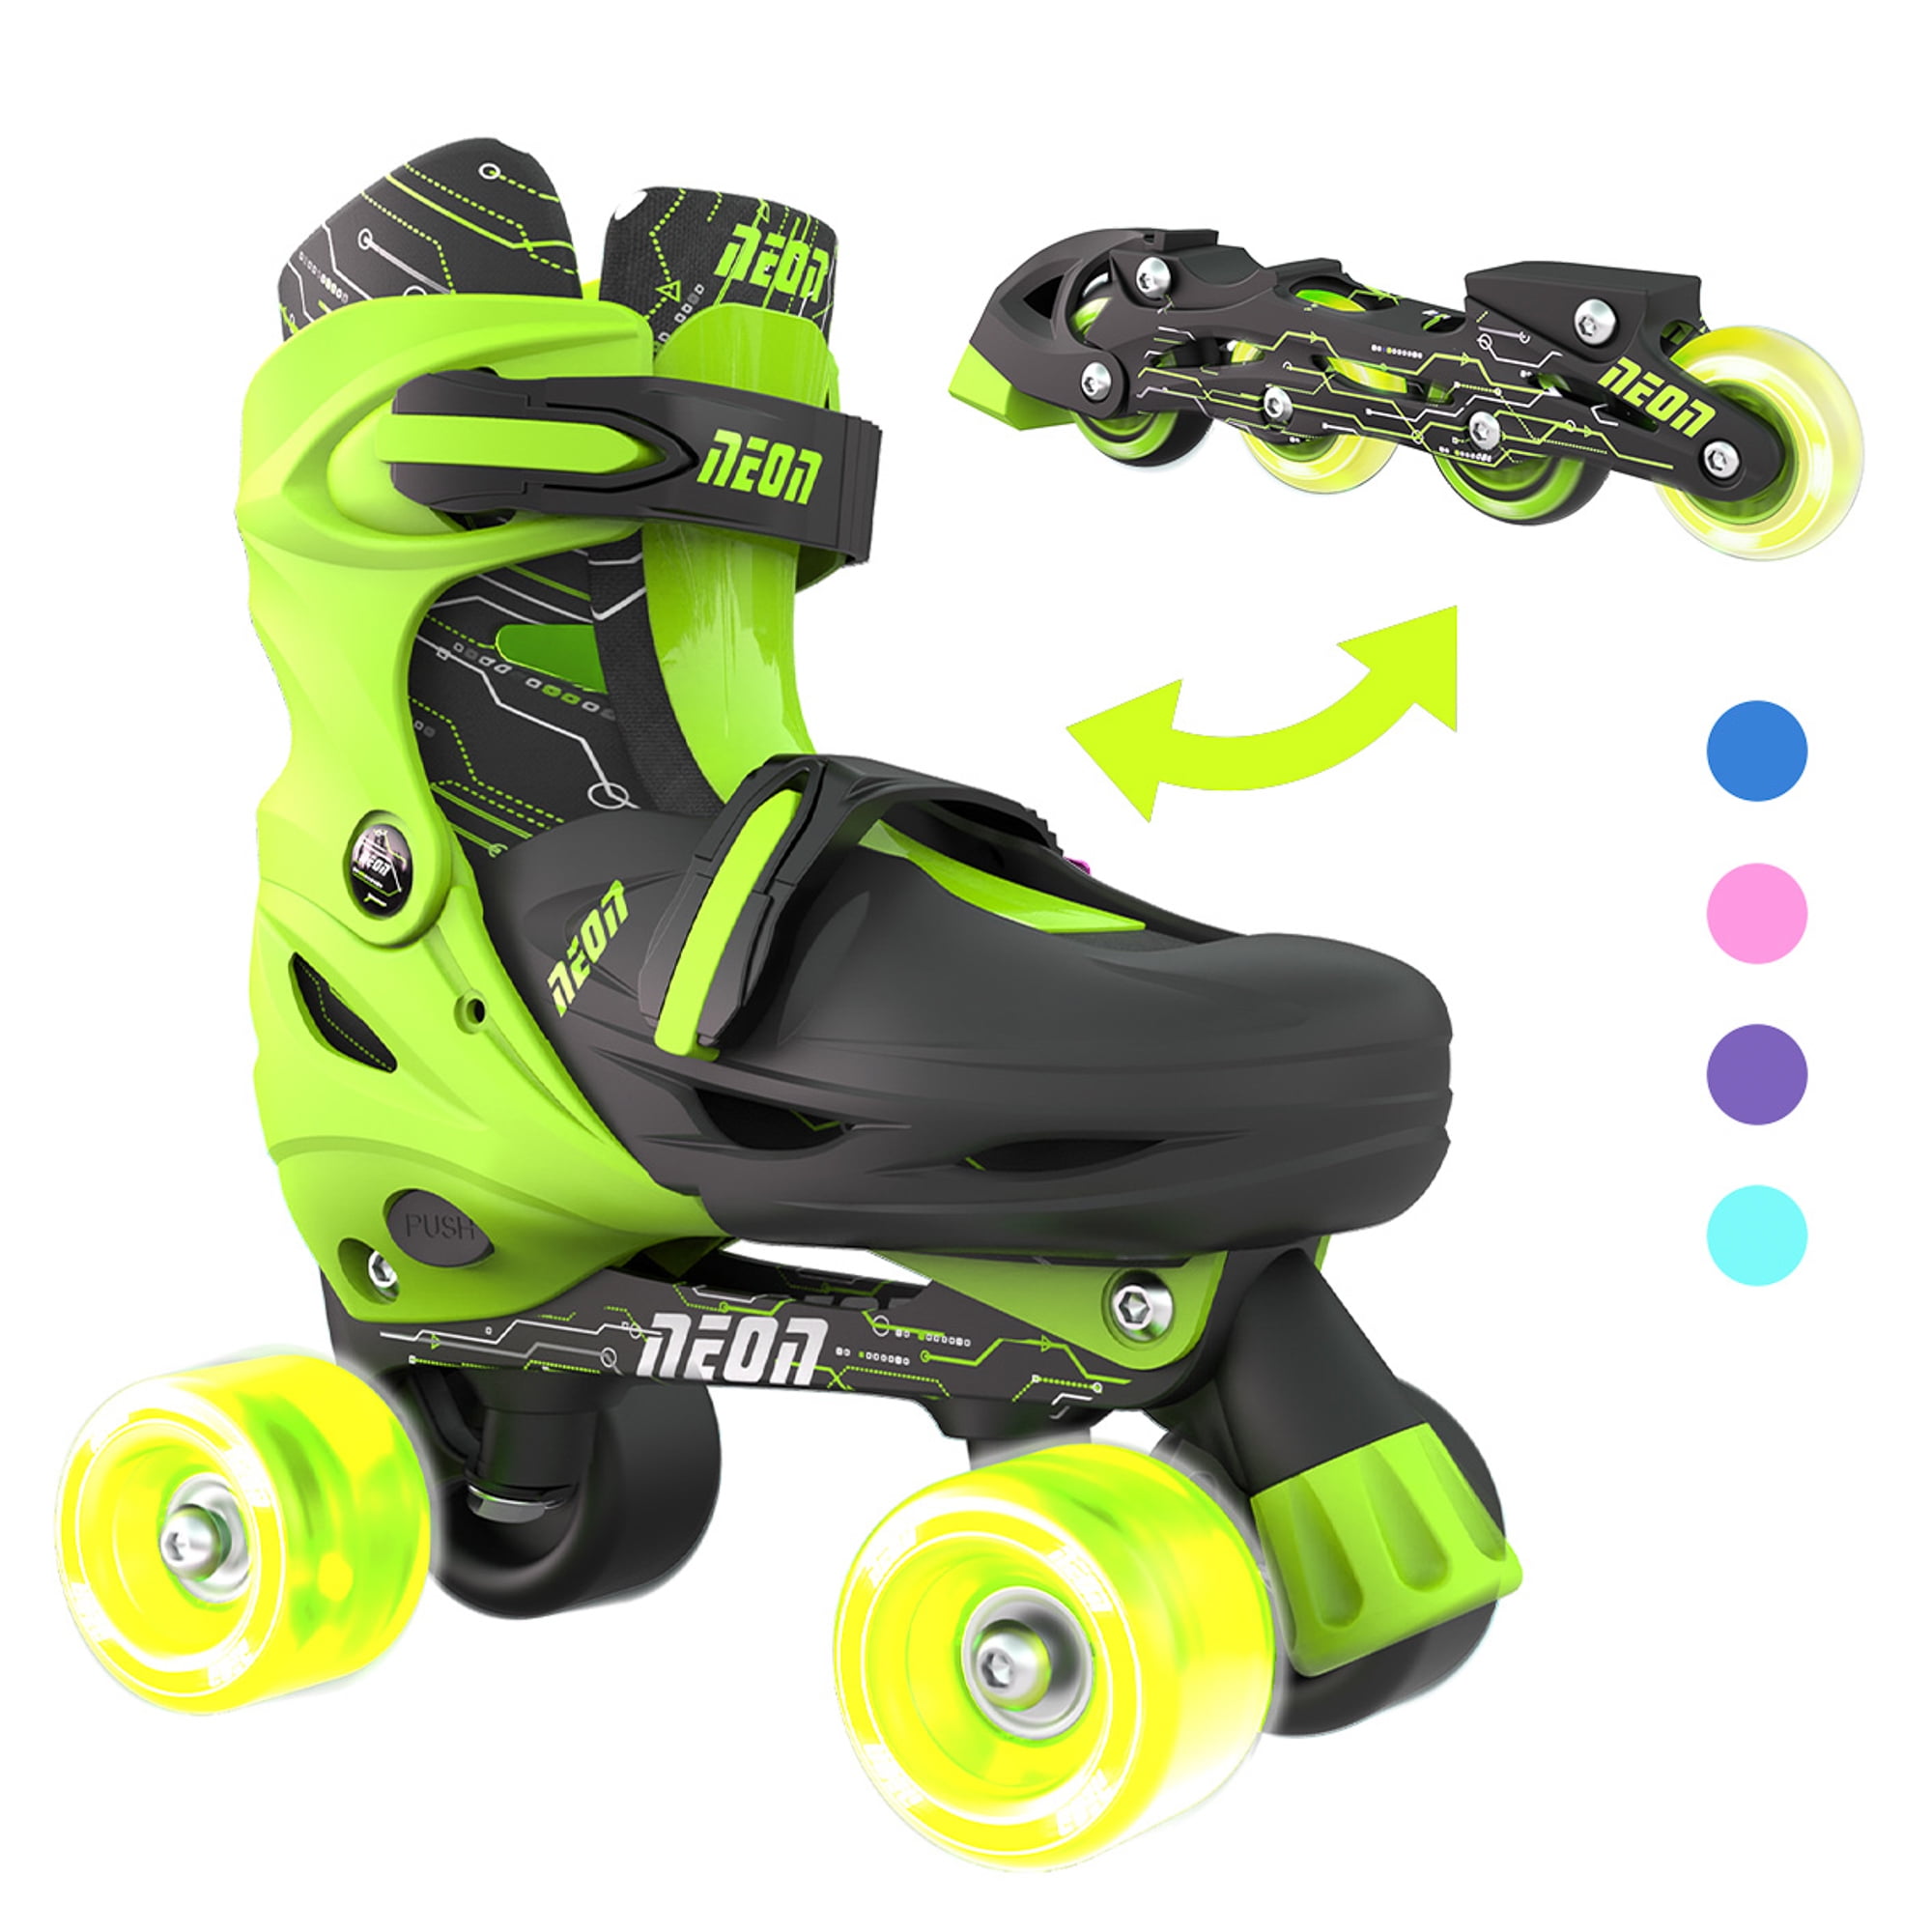 Neon Combo 2-in-1 Child Skates Inline and Quad - Unisex, Size 12-2 ...